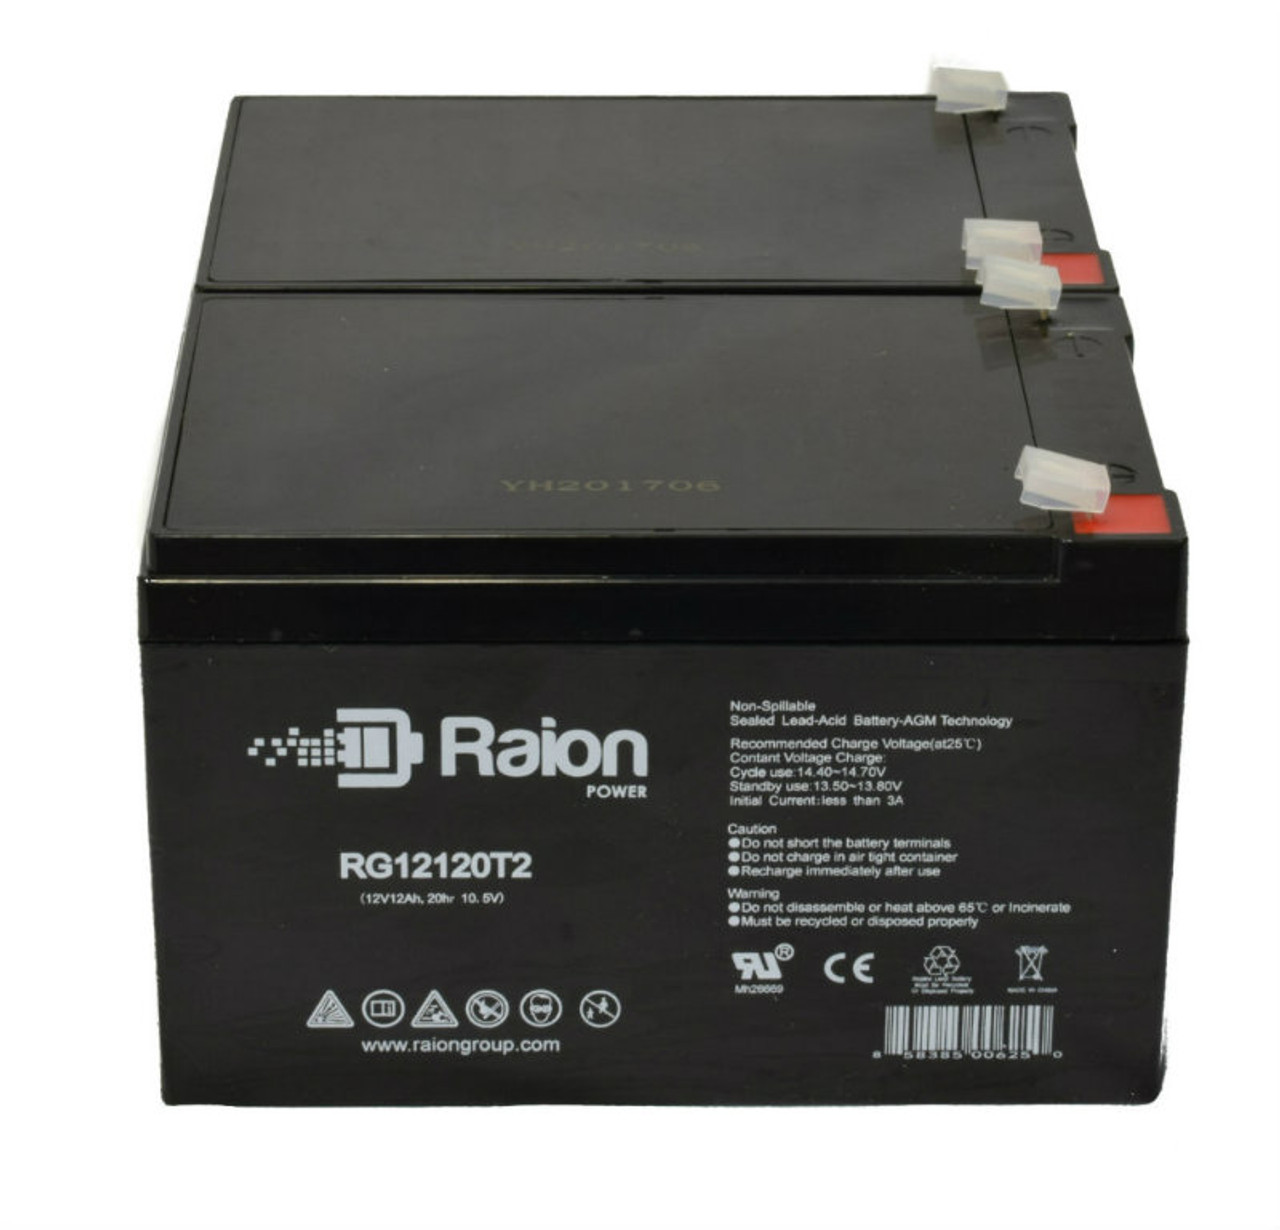 Raion Power 12V 12Ah Non-Spillable Compatible Replacement Battery for Koyosonic NP15-12 - (2 Pack)